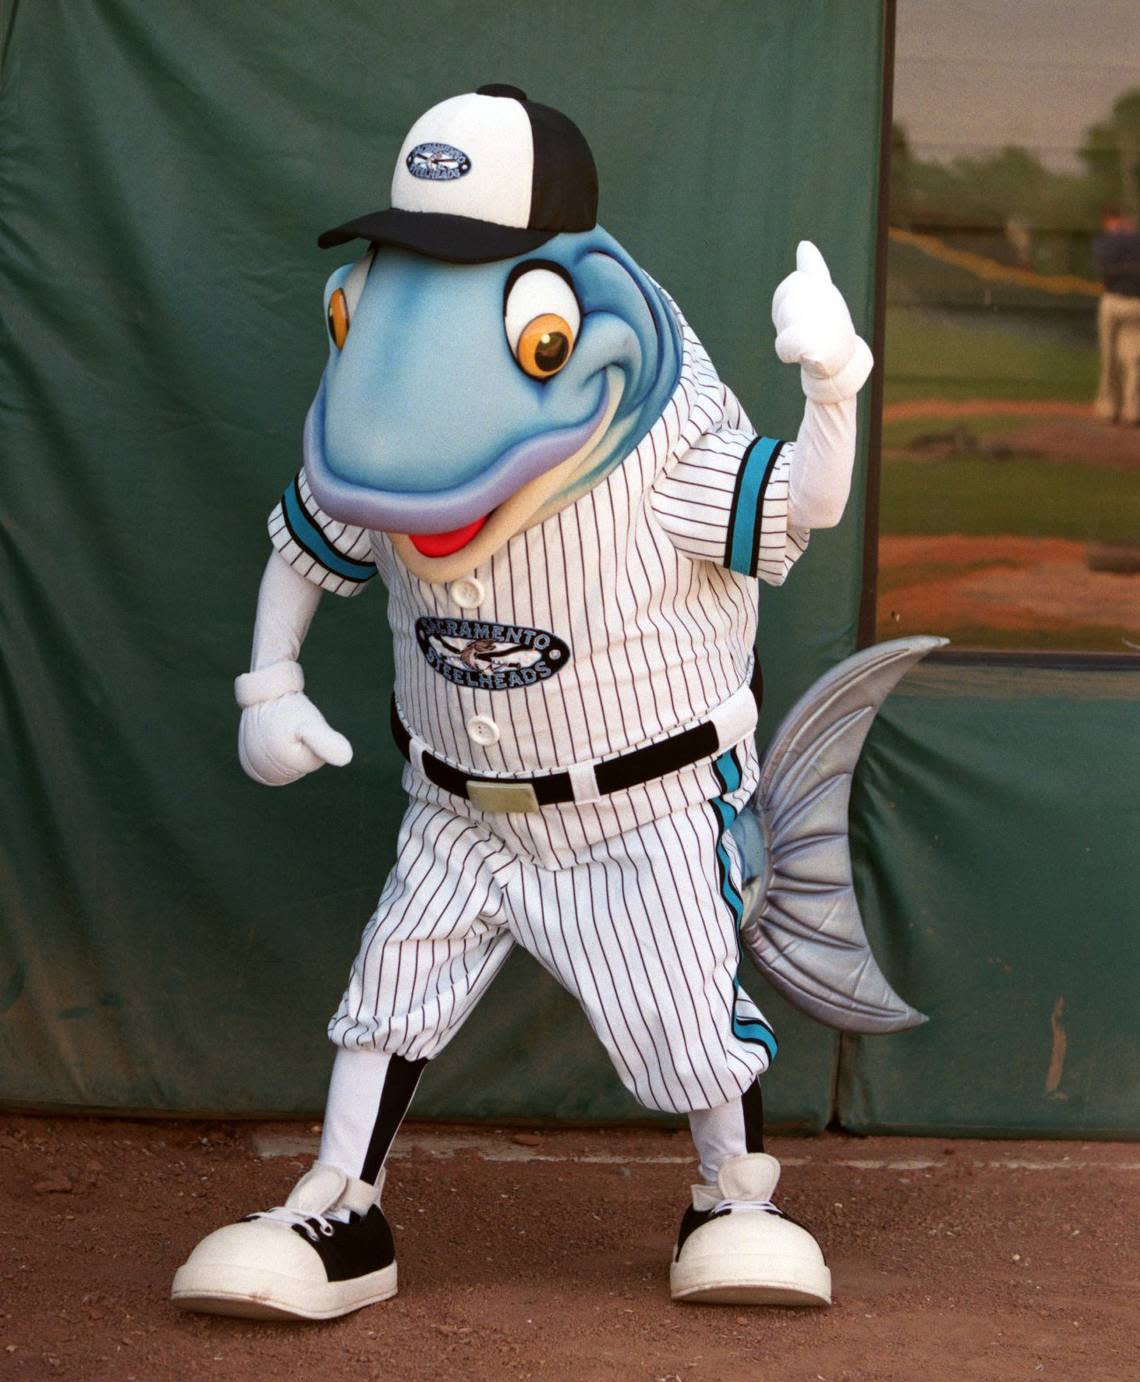 The mascot for the Sacramento Steelheads, an independent professional baseball team, makes an appearance at media day in May 1999. The team played at Sacramento City College for one season.